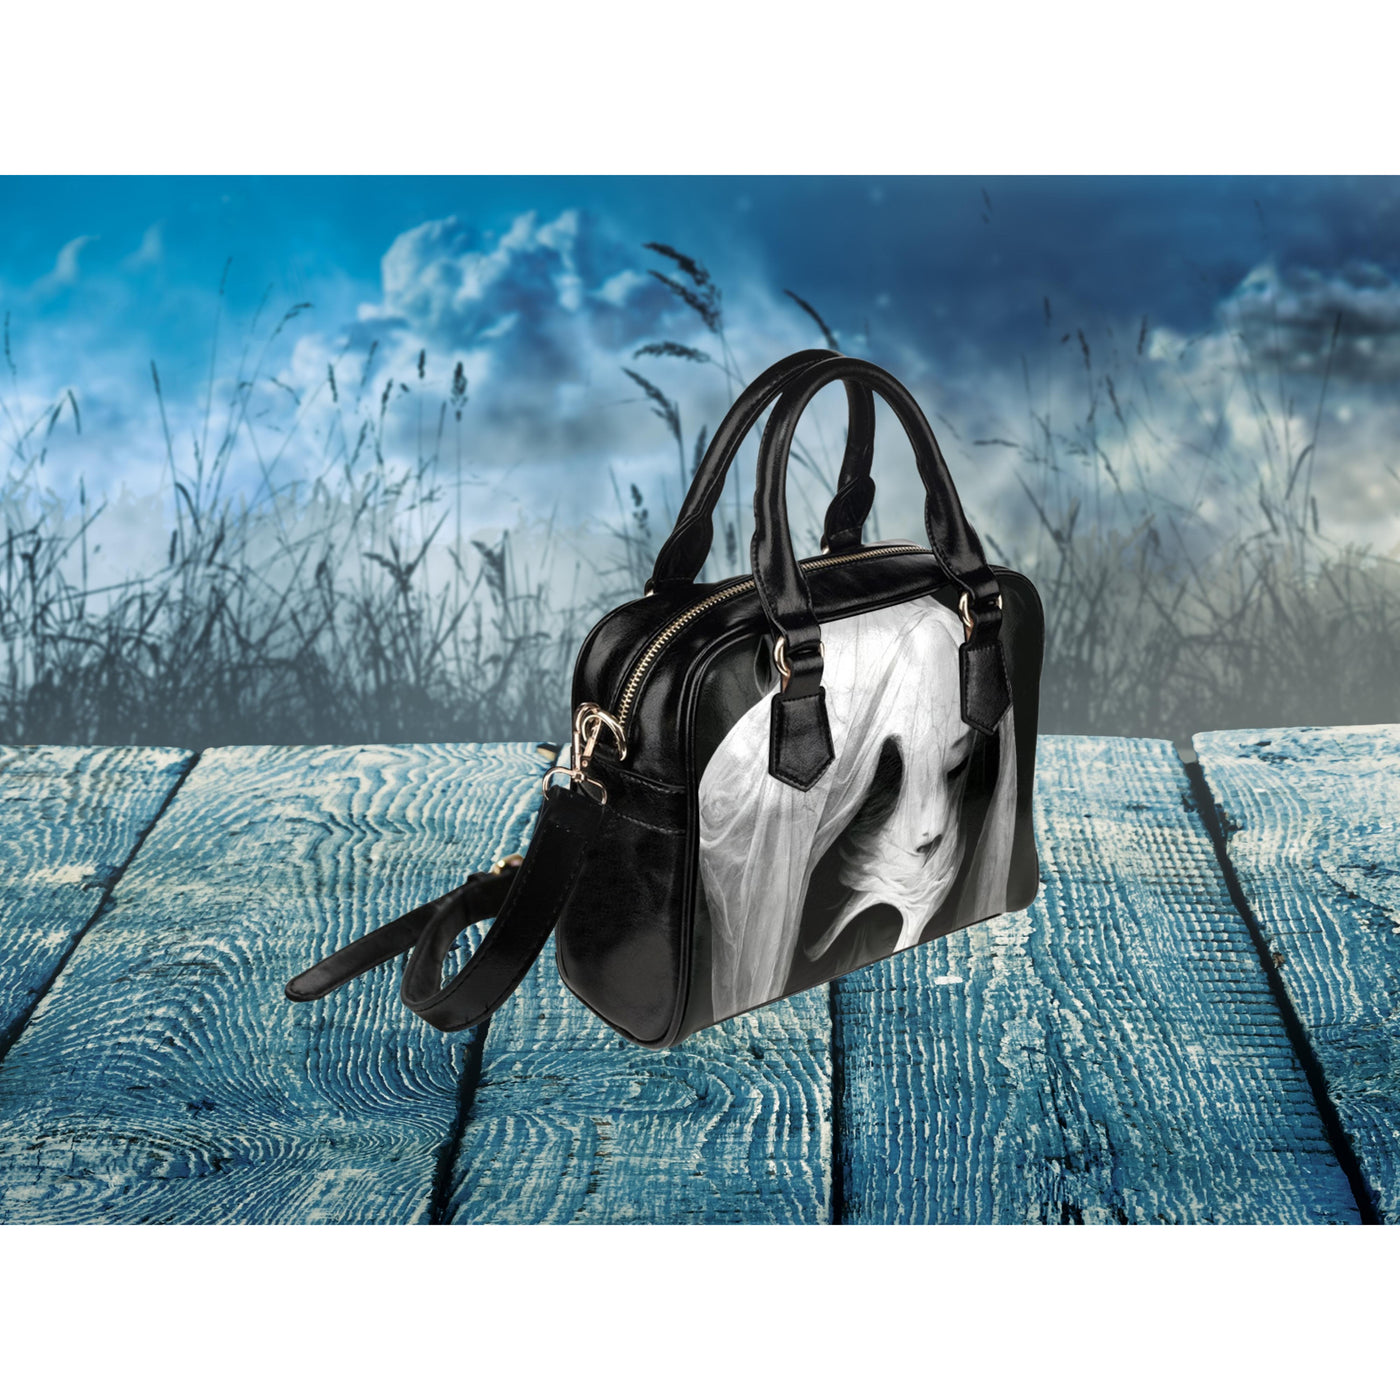 Slate Gray The Woman With No Face 3 | Leather Shoulder Bag